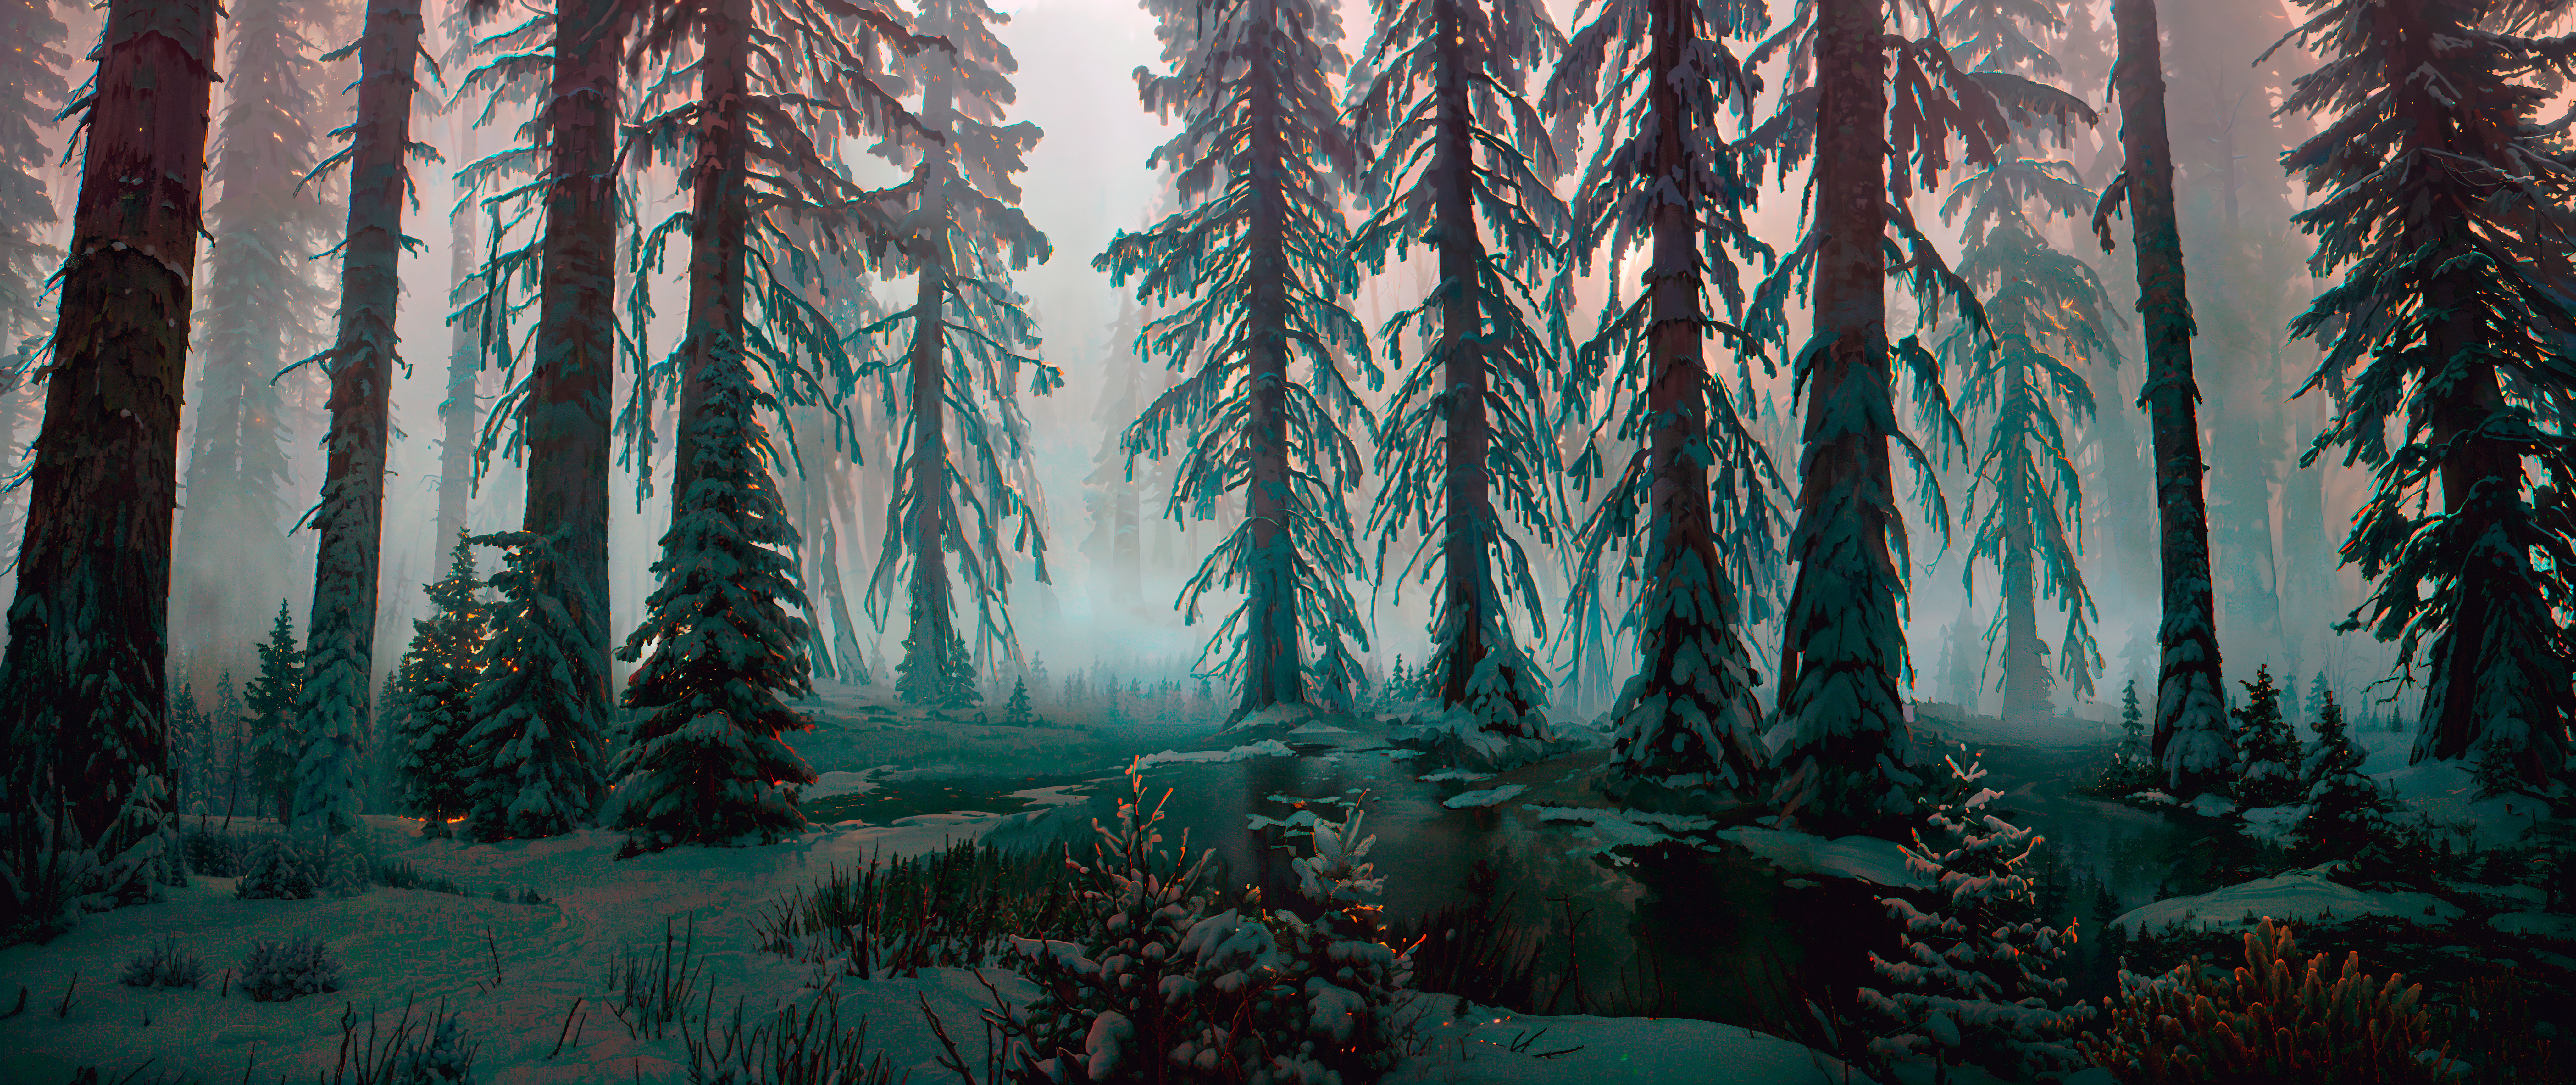 Neural Network Stable Diffusion Landscape Forest Snow Swamp Dark Cold Sunset Nature Trees Digital Ar 8192x3449